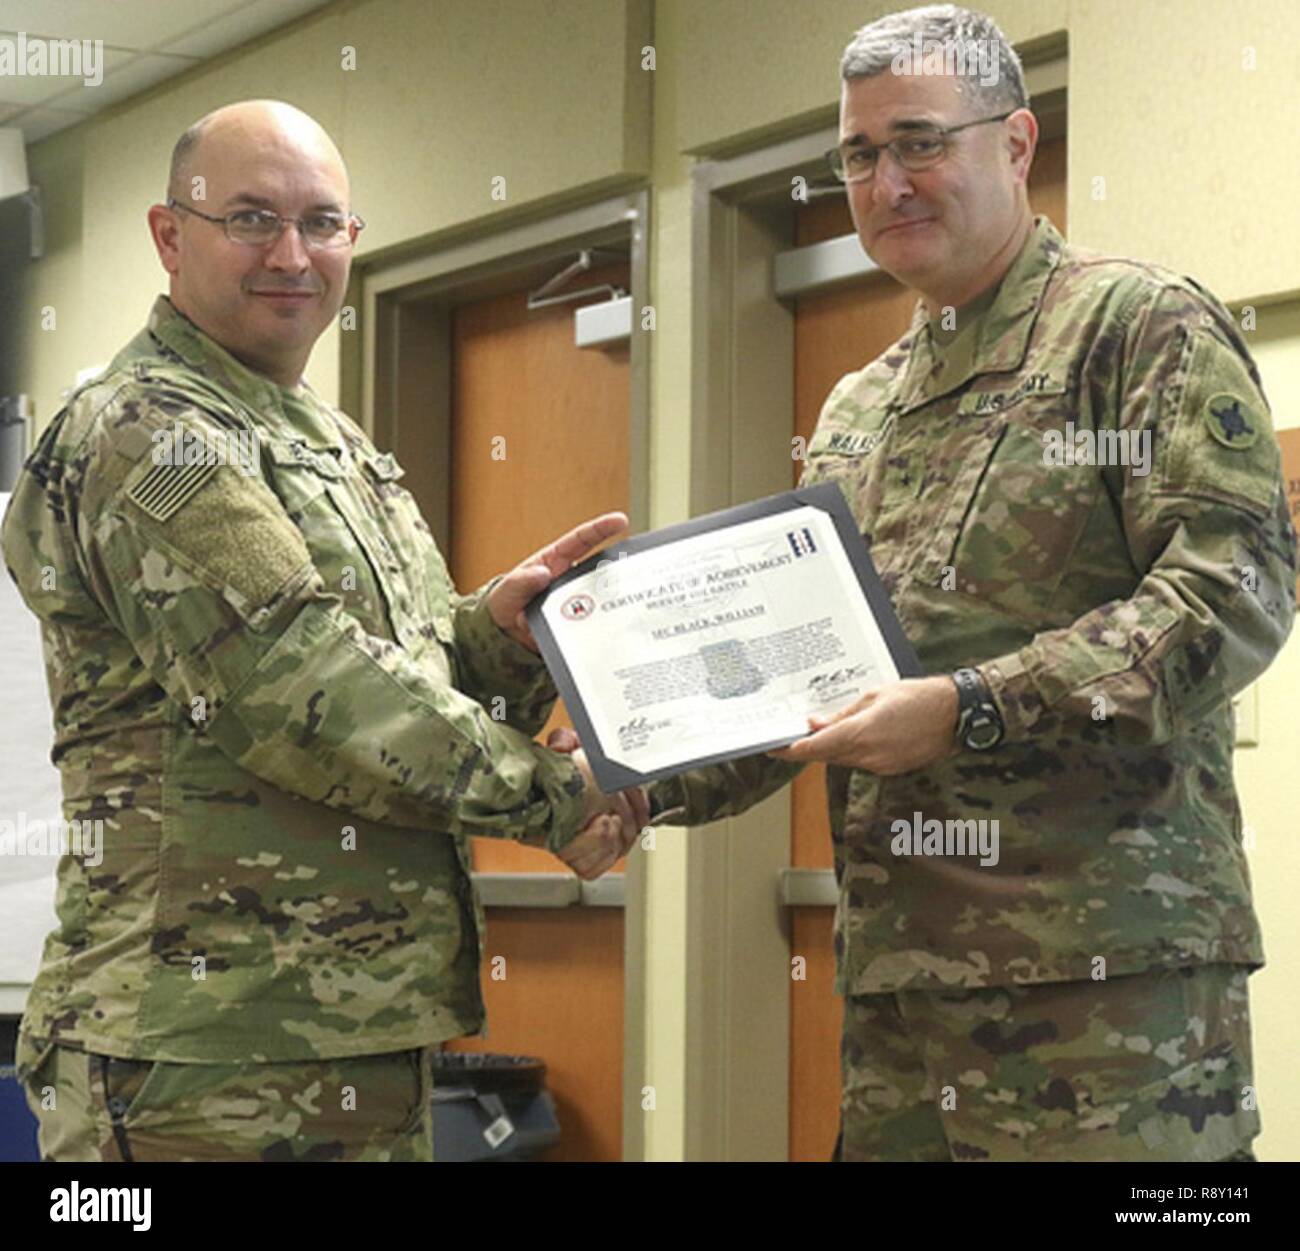 Sgt. 1st Class William Black, 184th Sustainment Command receives a Hero of The Battle certificate from Brig. Gen. Clint E. Walker, 184 SC commander. Black was awarded for his professionalism and proficiency during the units validation for the upcoming deployment. Stock Photo